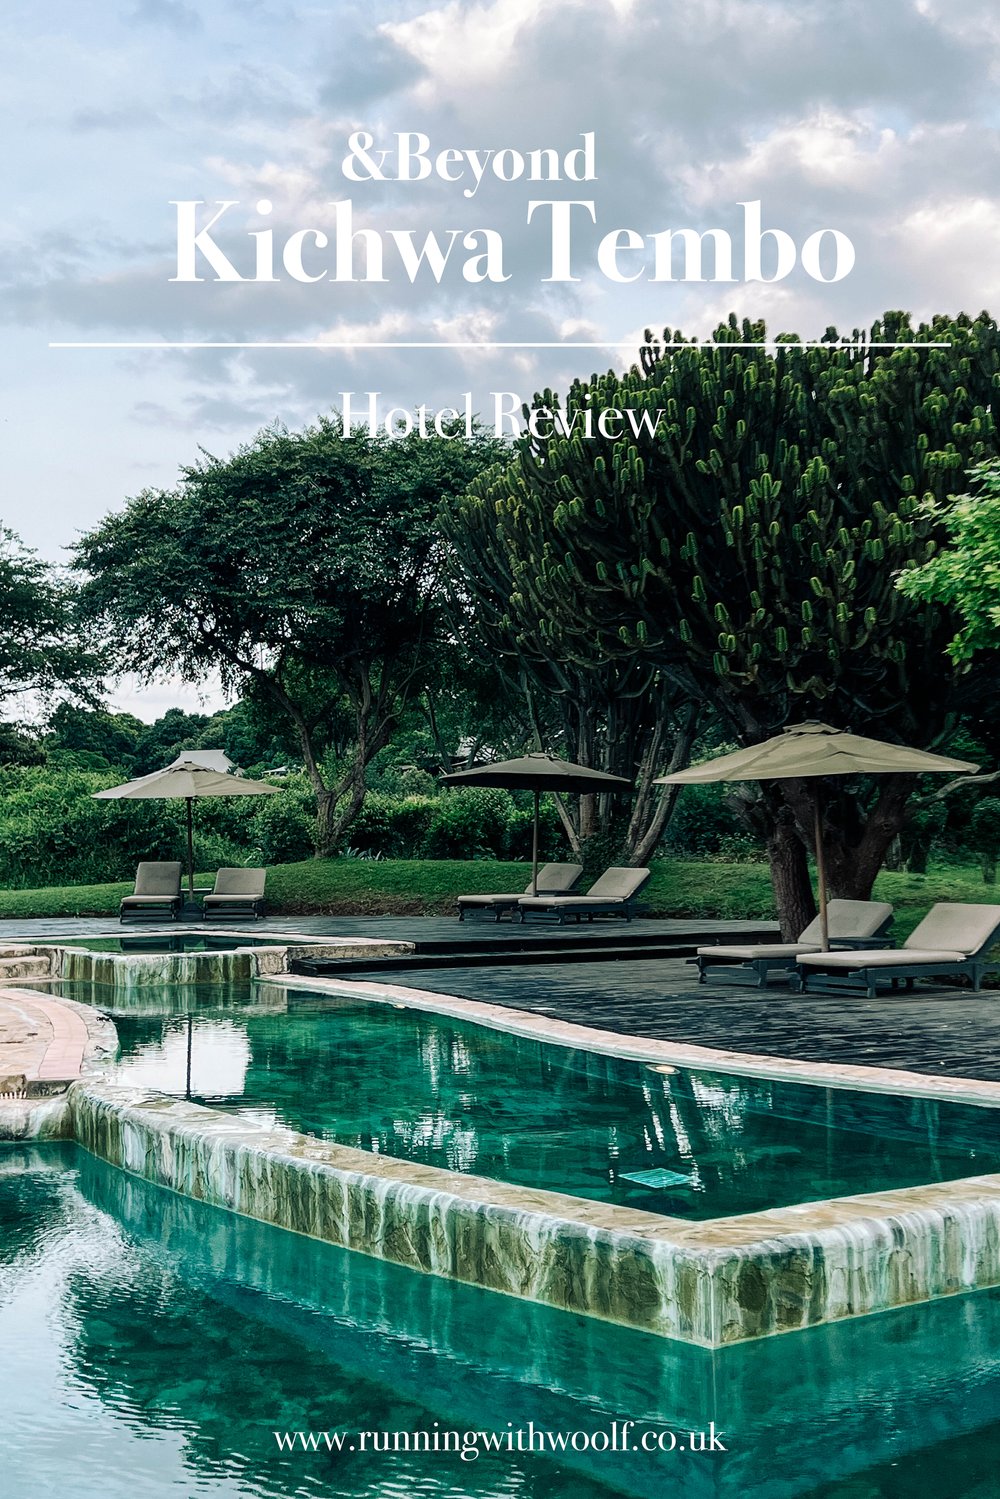 Hotel Review Kichwa Tembo Review.jpg